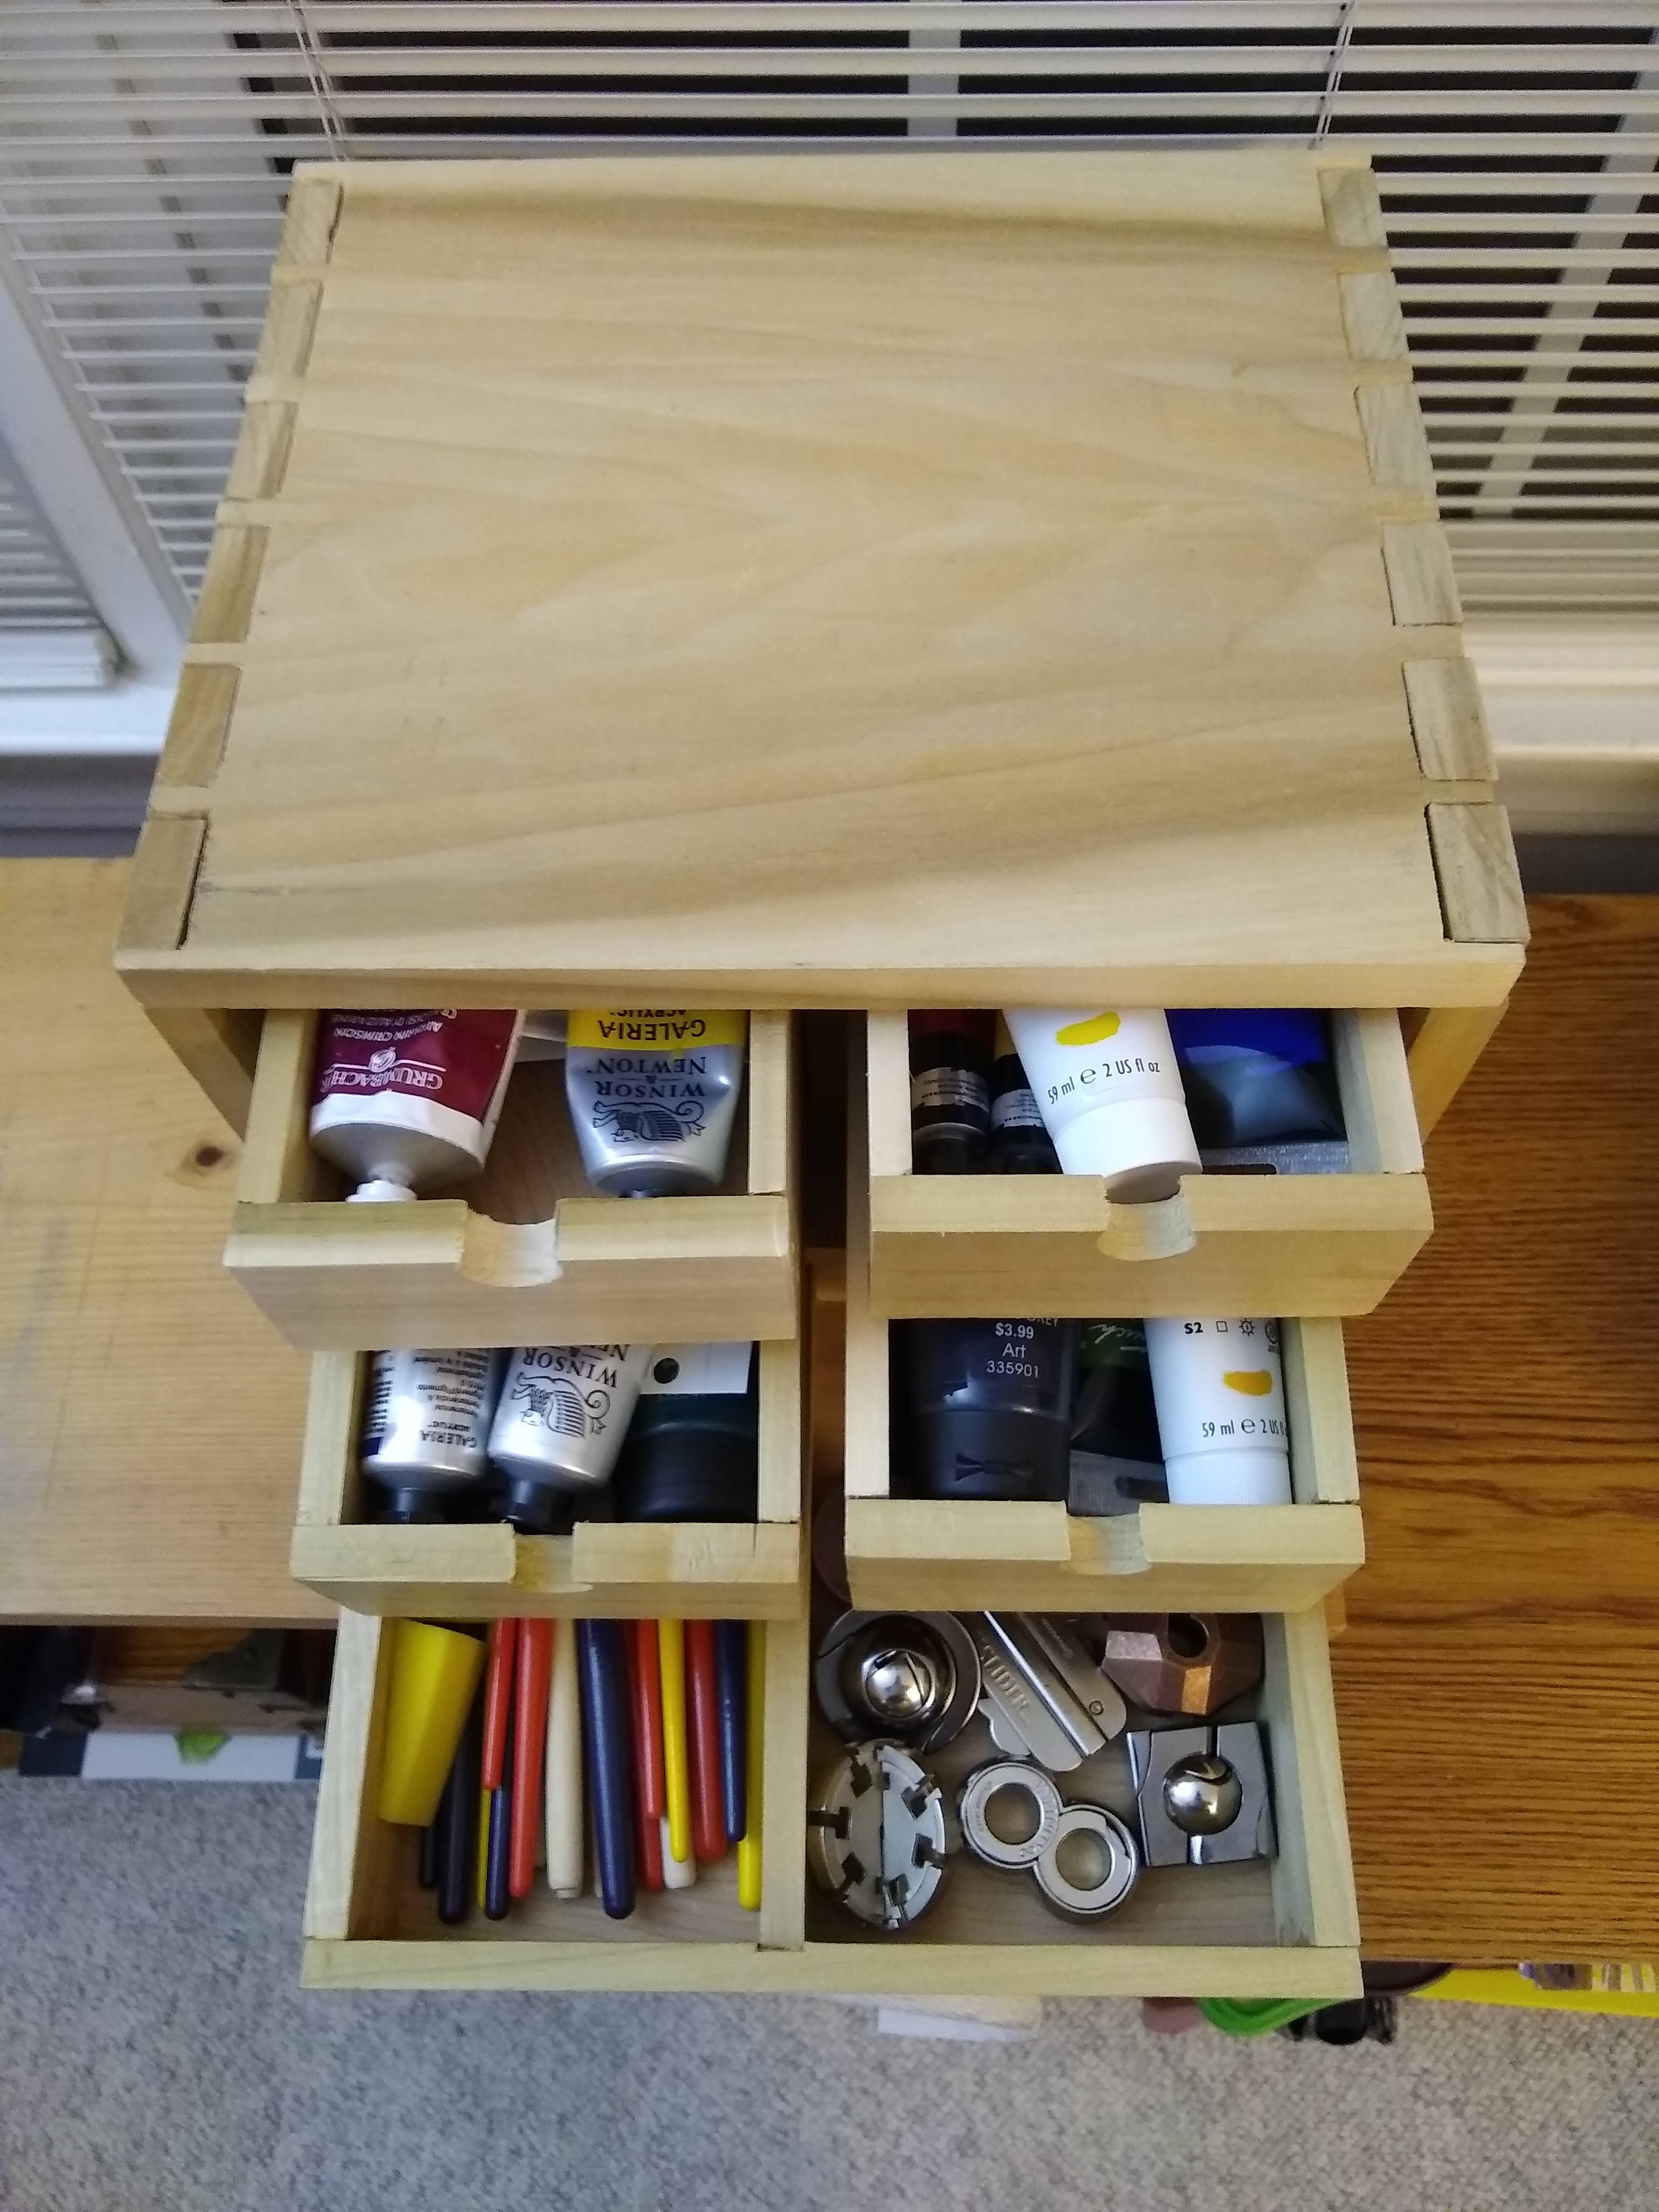 17_Layout of drawer contents_10.30.20.jpg